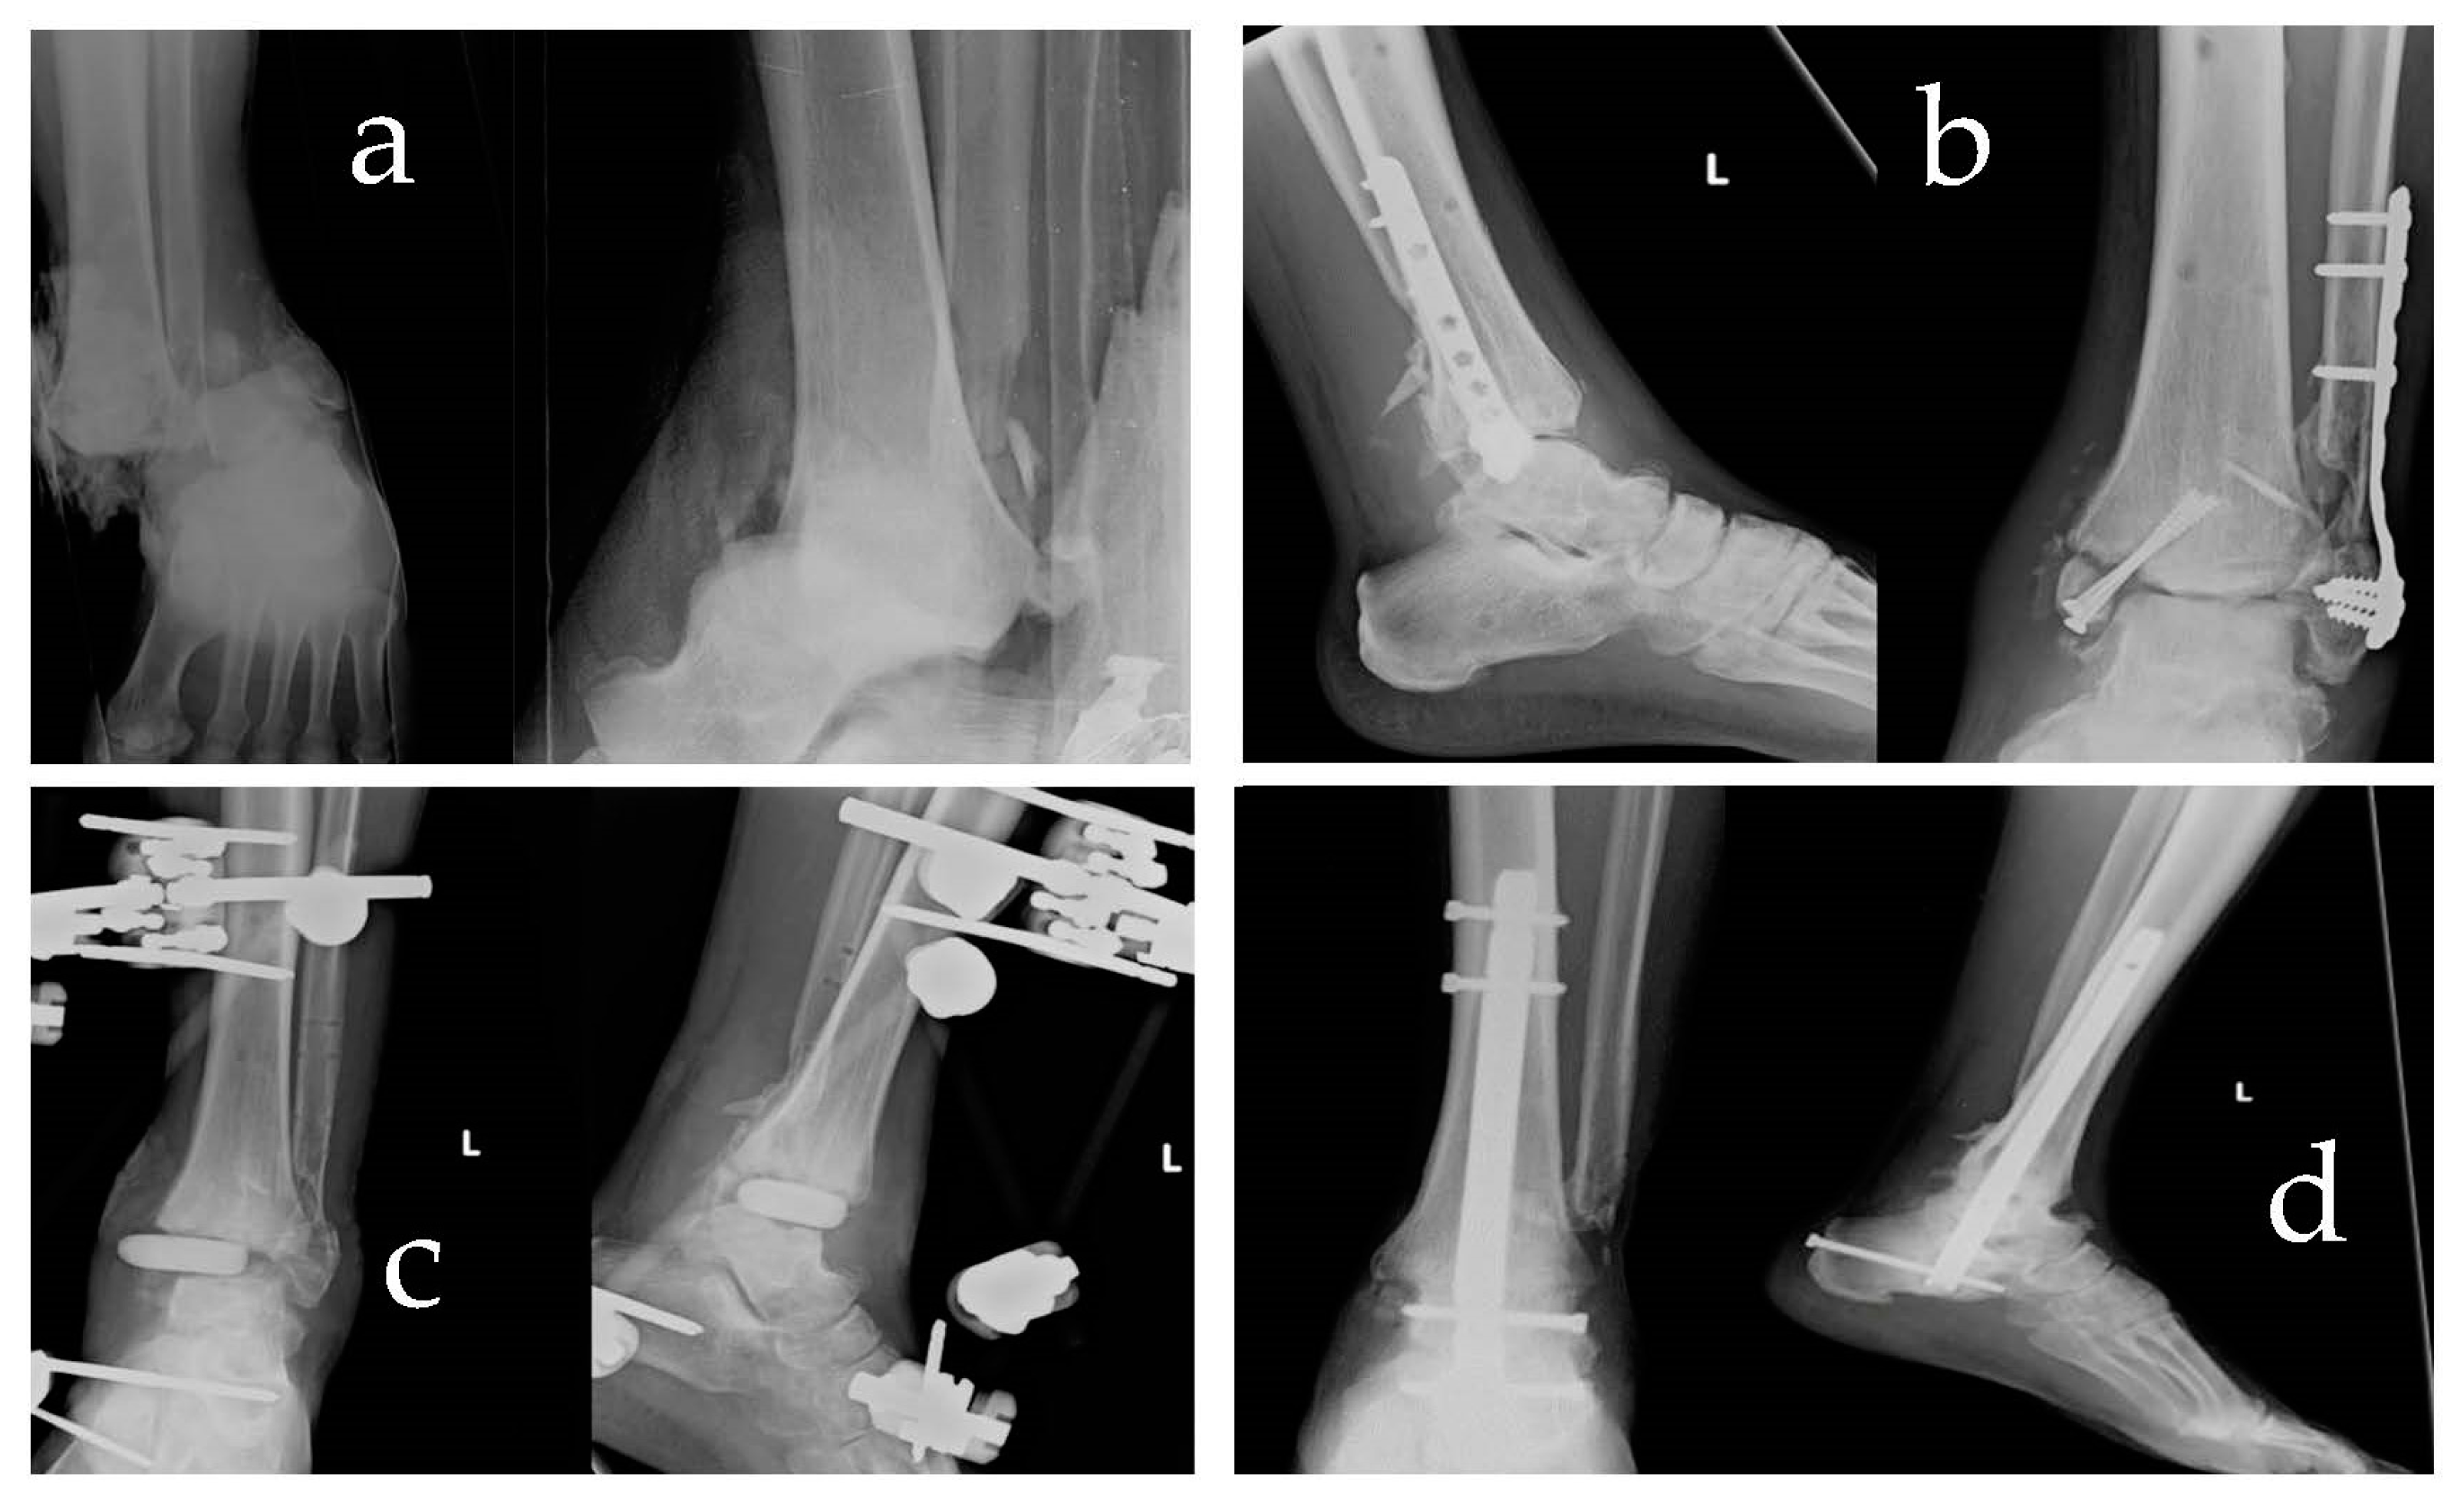 Extraction of Broken Tibial Interlock Nail with a Retrograde Hooked Guide  Wire: A Novel Surgical Technique | Journal of Orthopaedic Case Reports